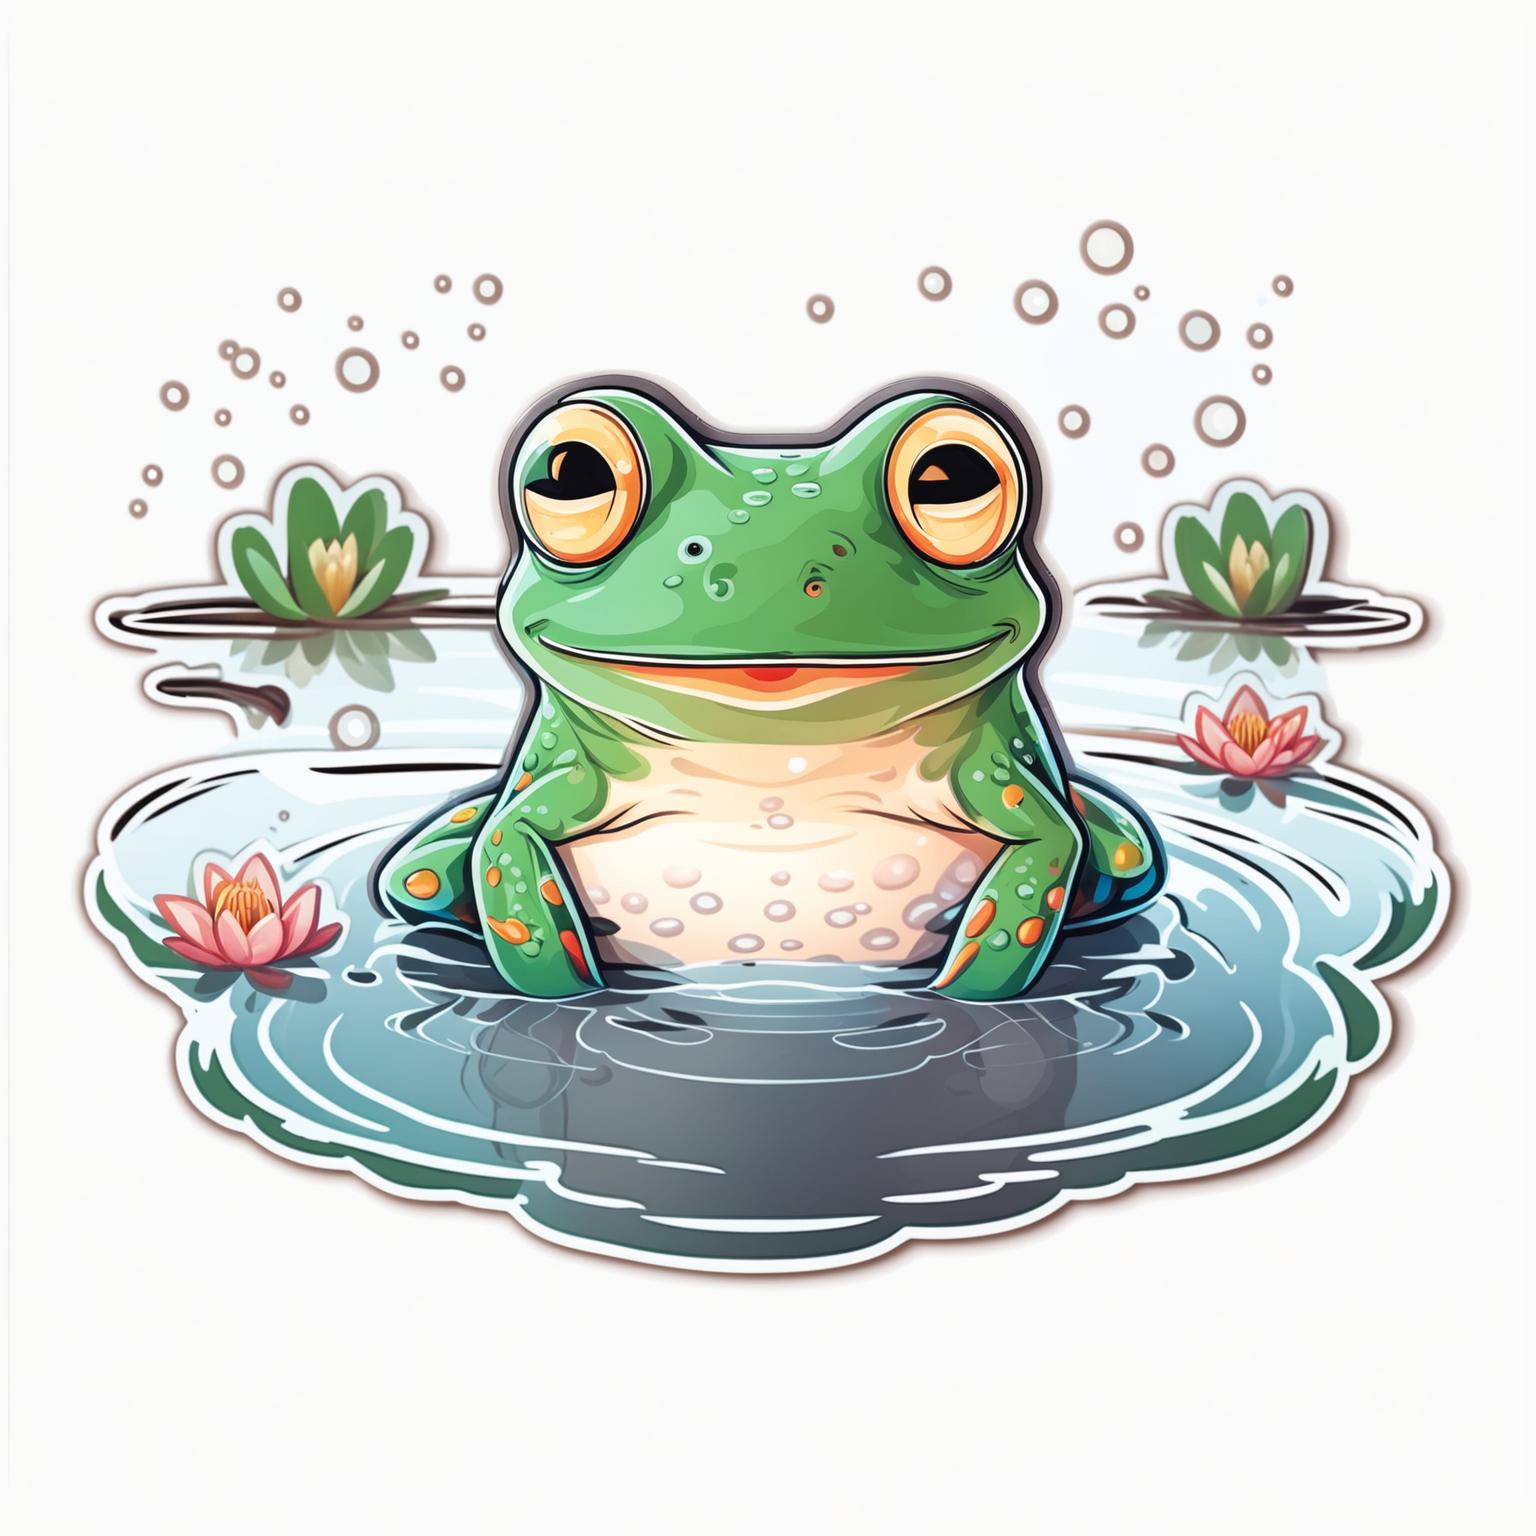 Sticker design of an adorable frog swimming in a pond with a cute expression, small ripples, and floating water lilies.